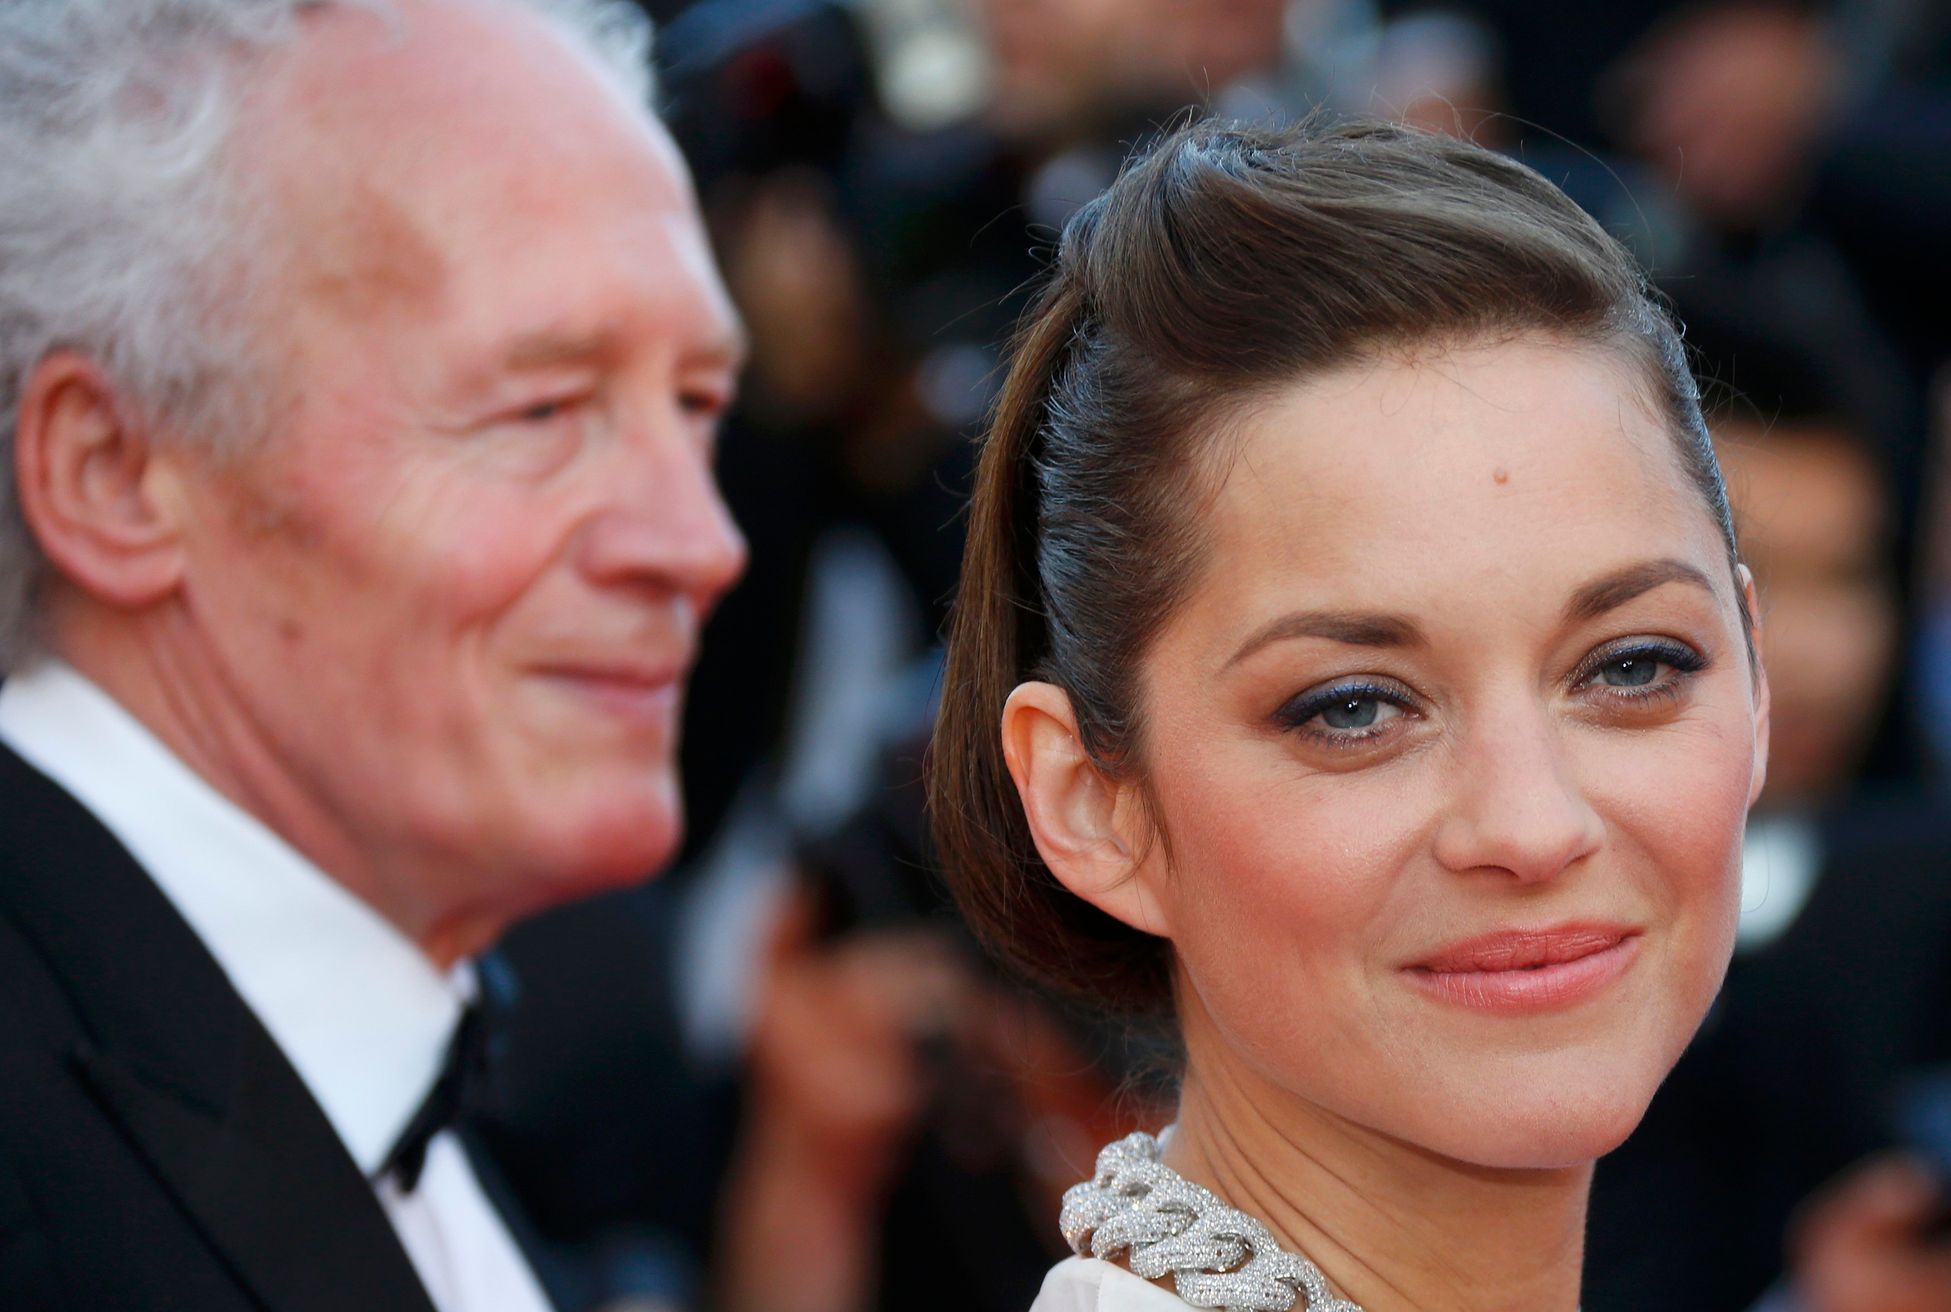 Director Jean-Pierre Dardenne and cast members Marion Cotillard pose on the red carpet as they arrivefor the screening of the film &quot;Deux jours, une nuit&quot; at the 67th Cannes Film Festival in